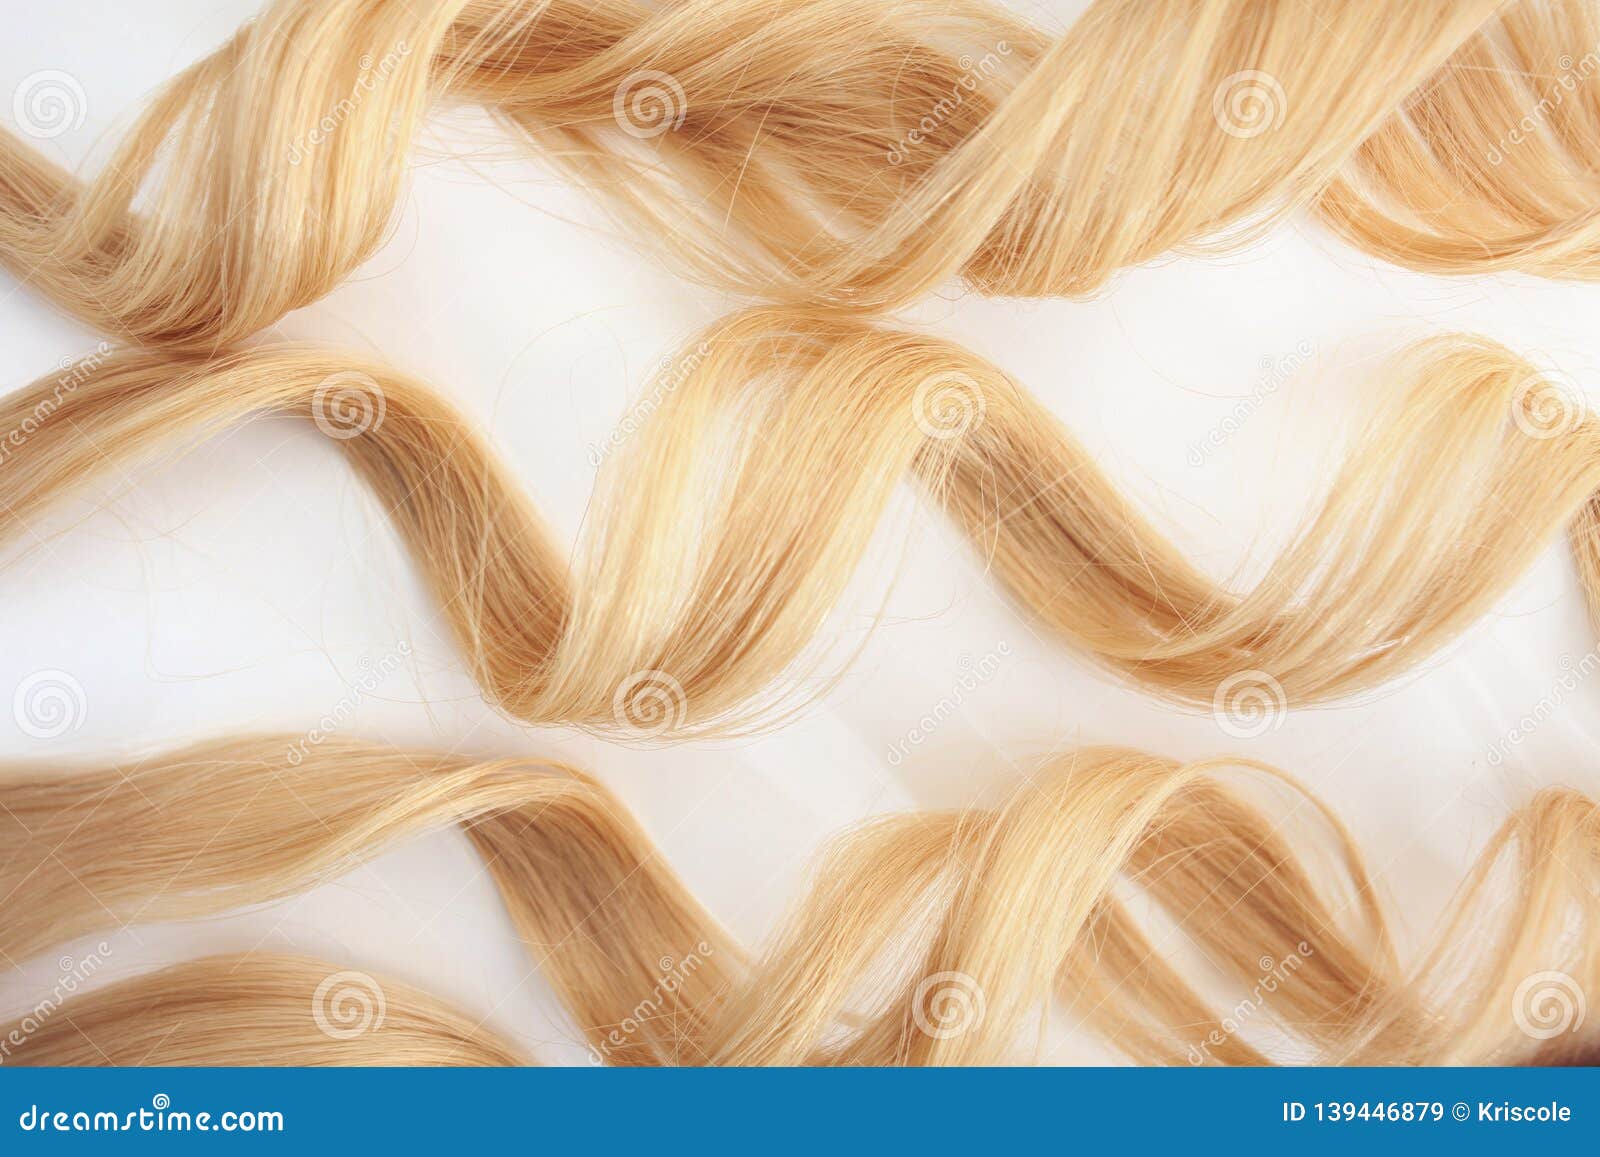 curls curled on the curling iron,  on white background. strand of blonde hair, hair care